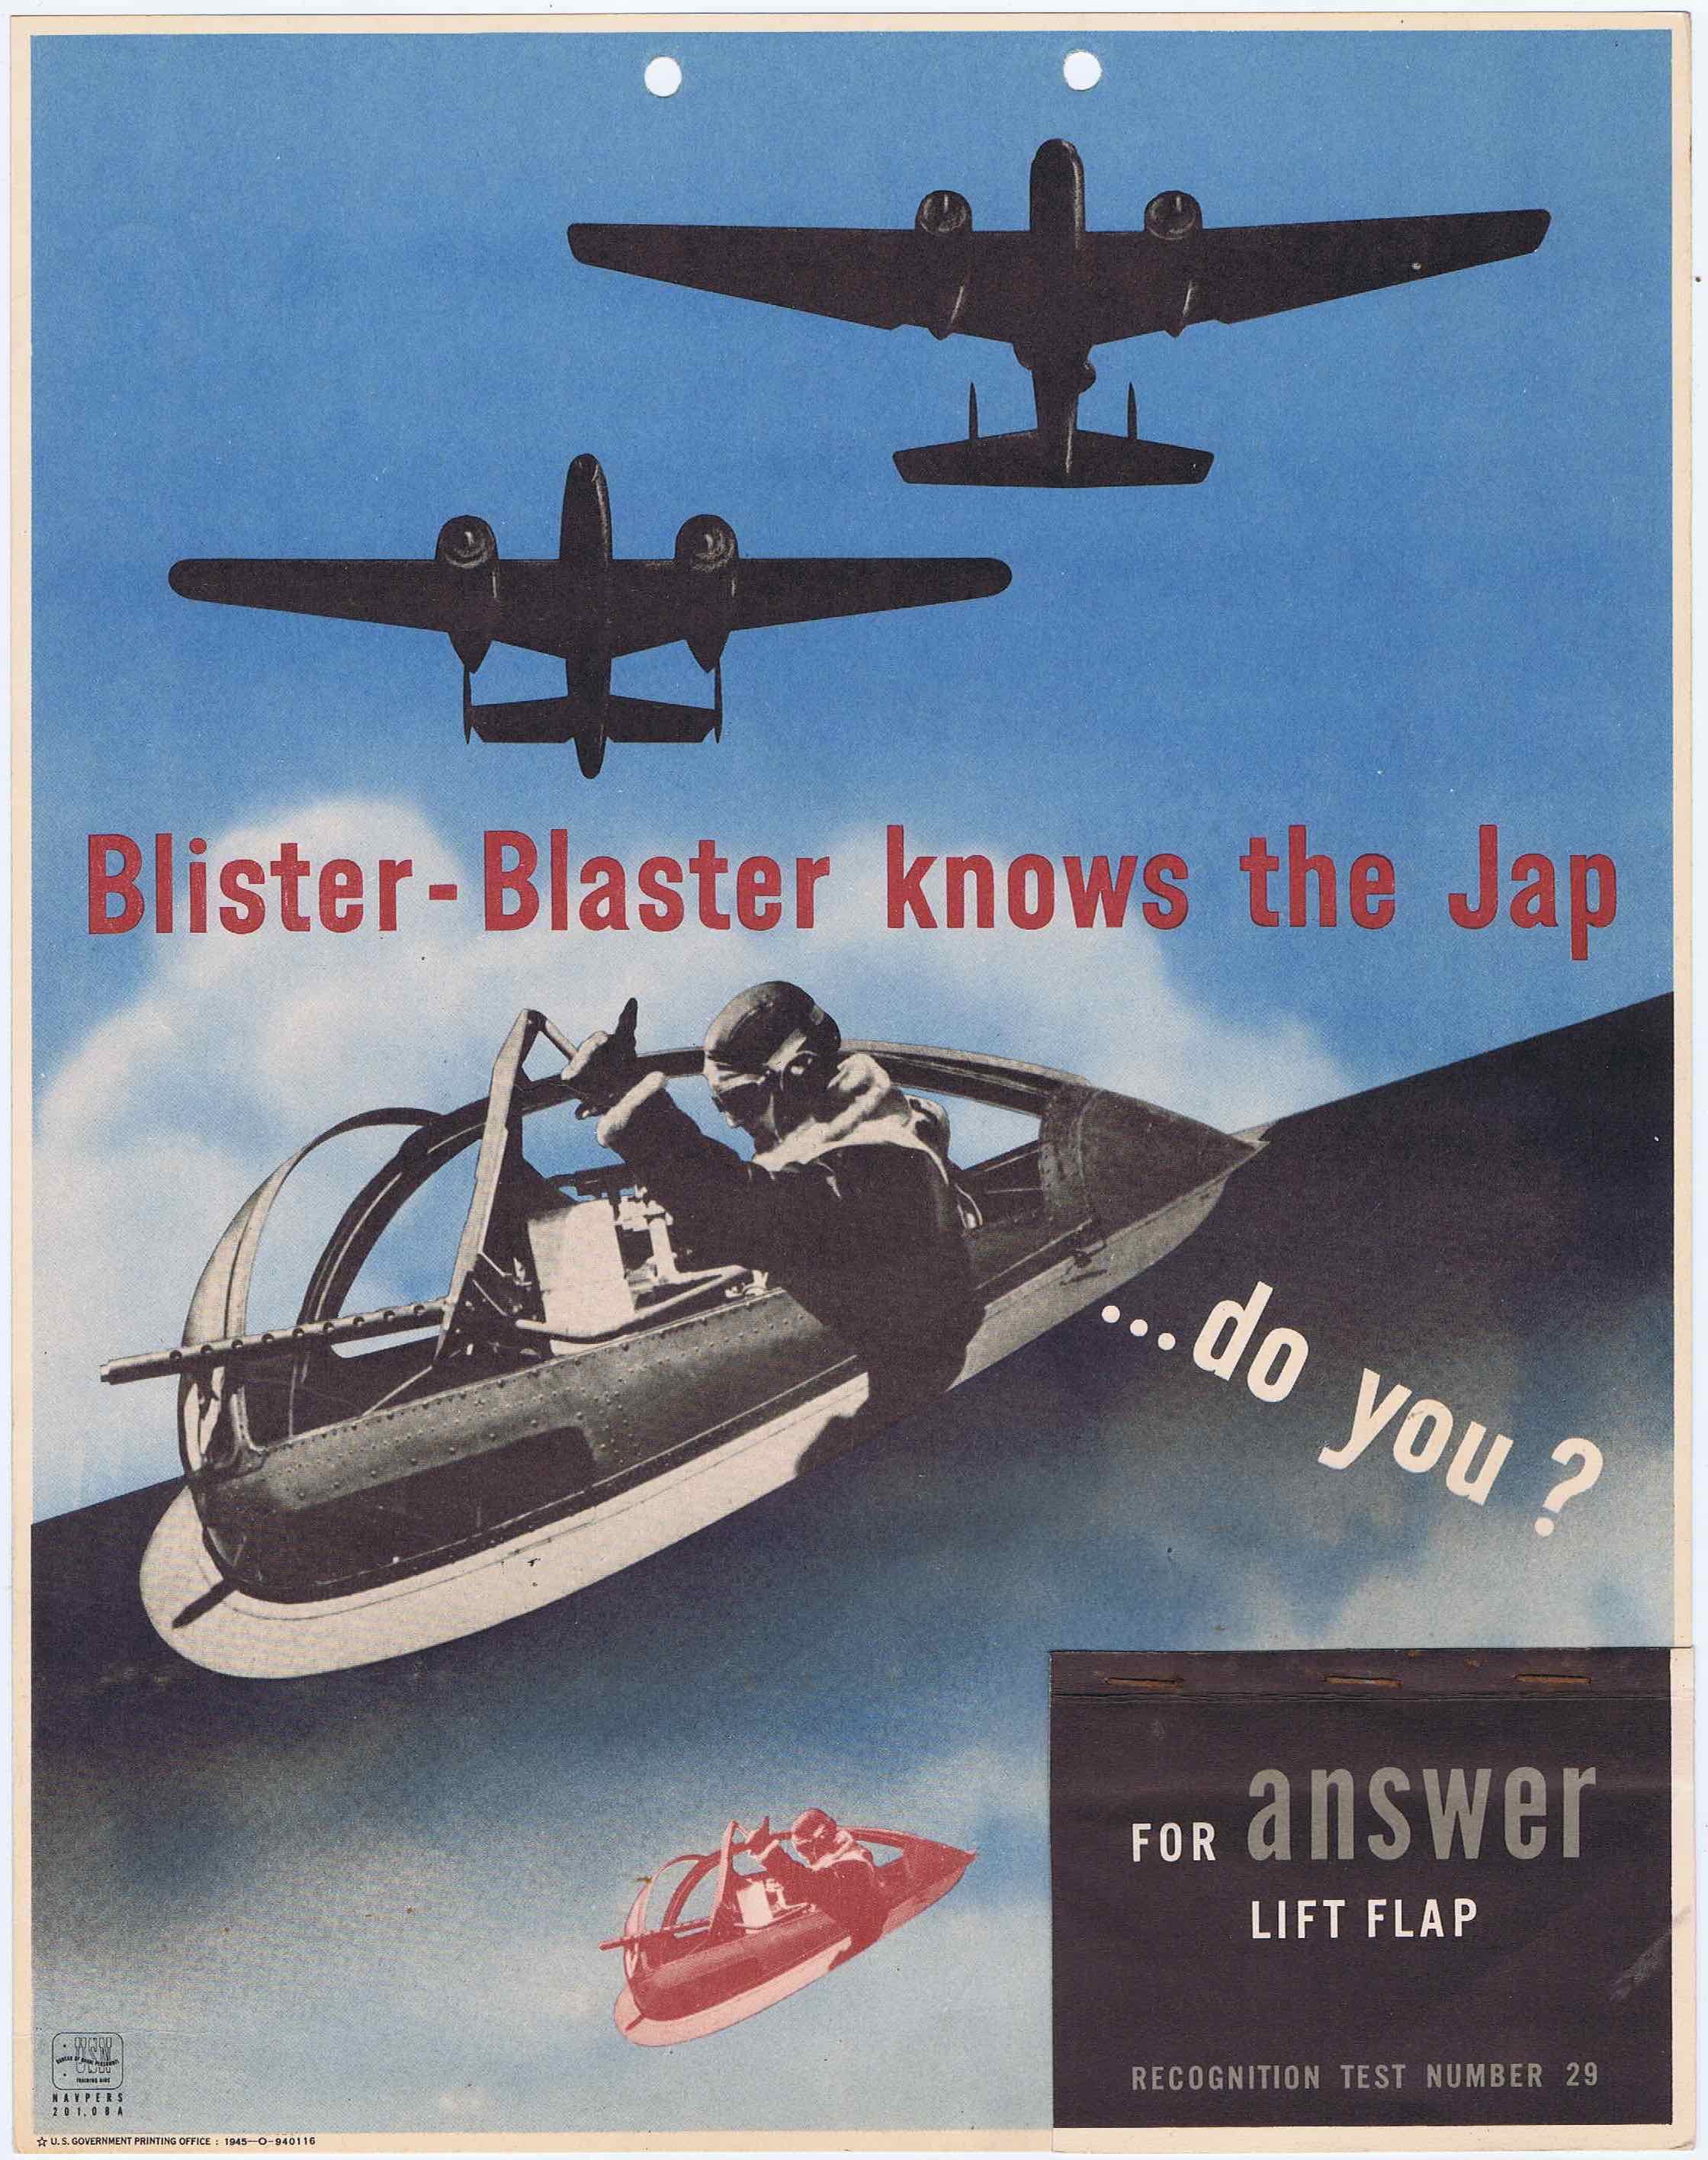 J316	BLISTER BLASTER KNOWS THE JAP…DO YOU? - U.S. ARMY AIR FORCE RECOGNITION POSTER